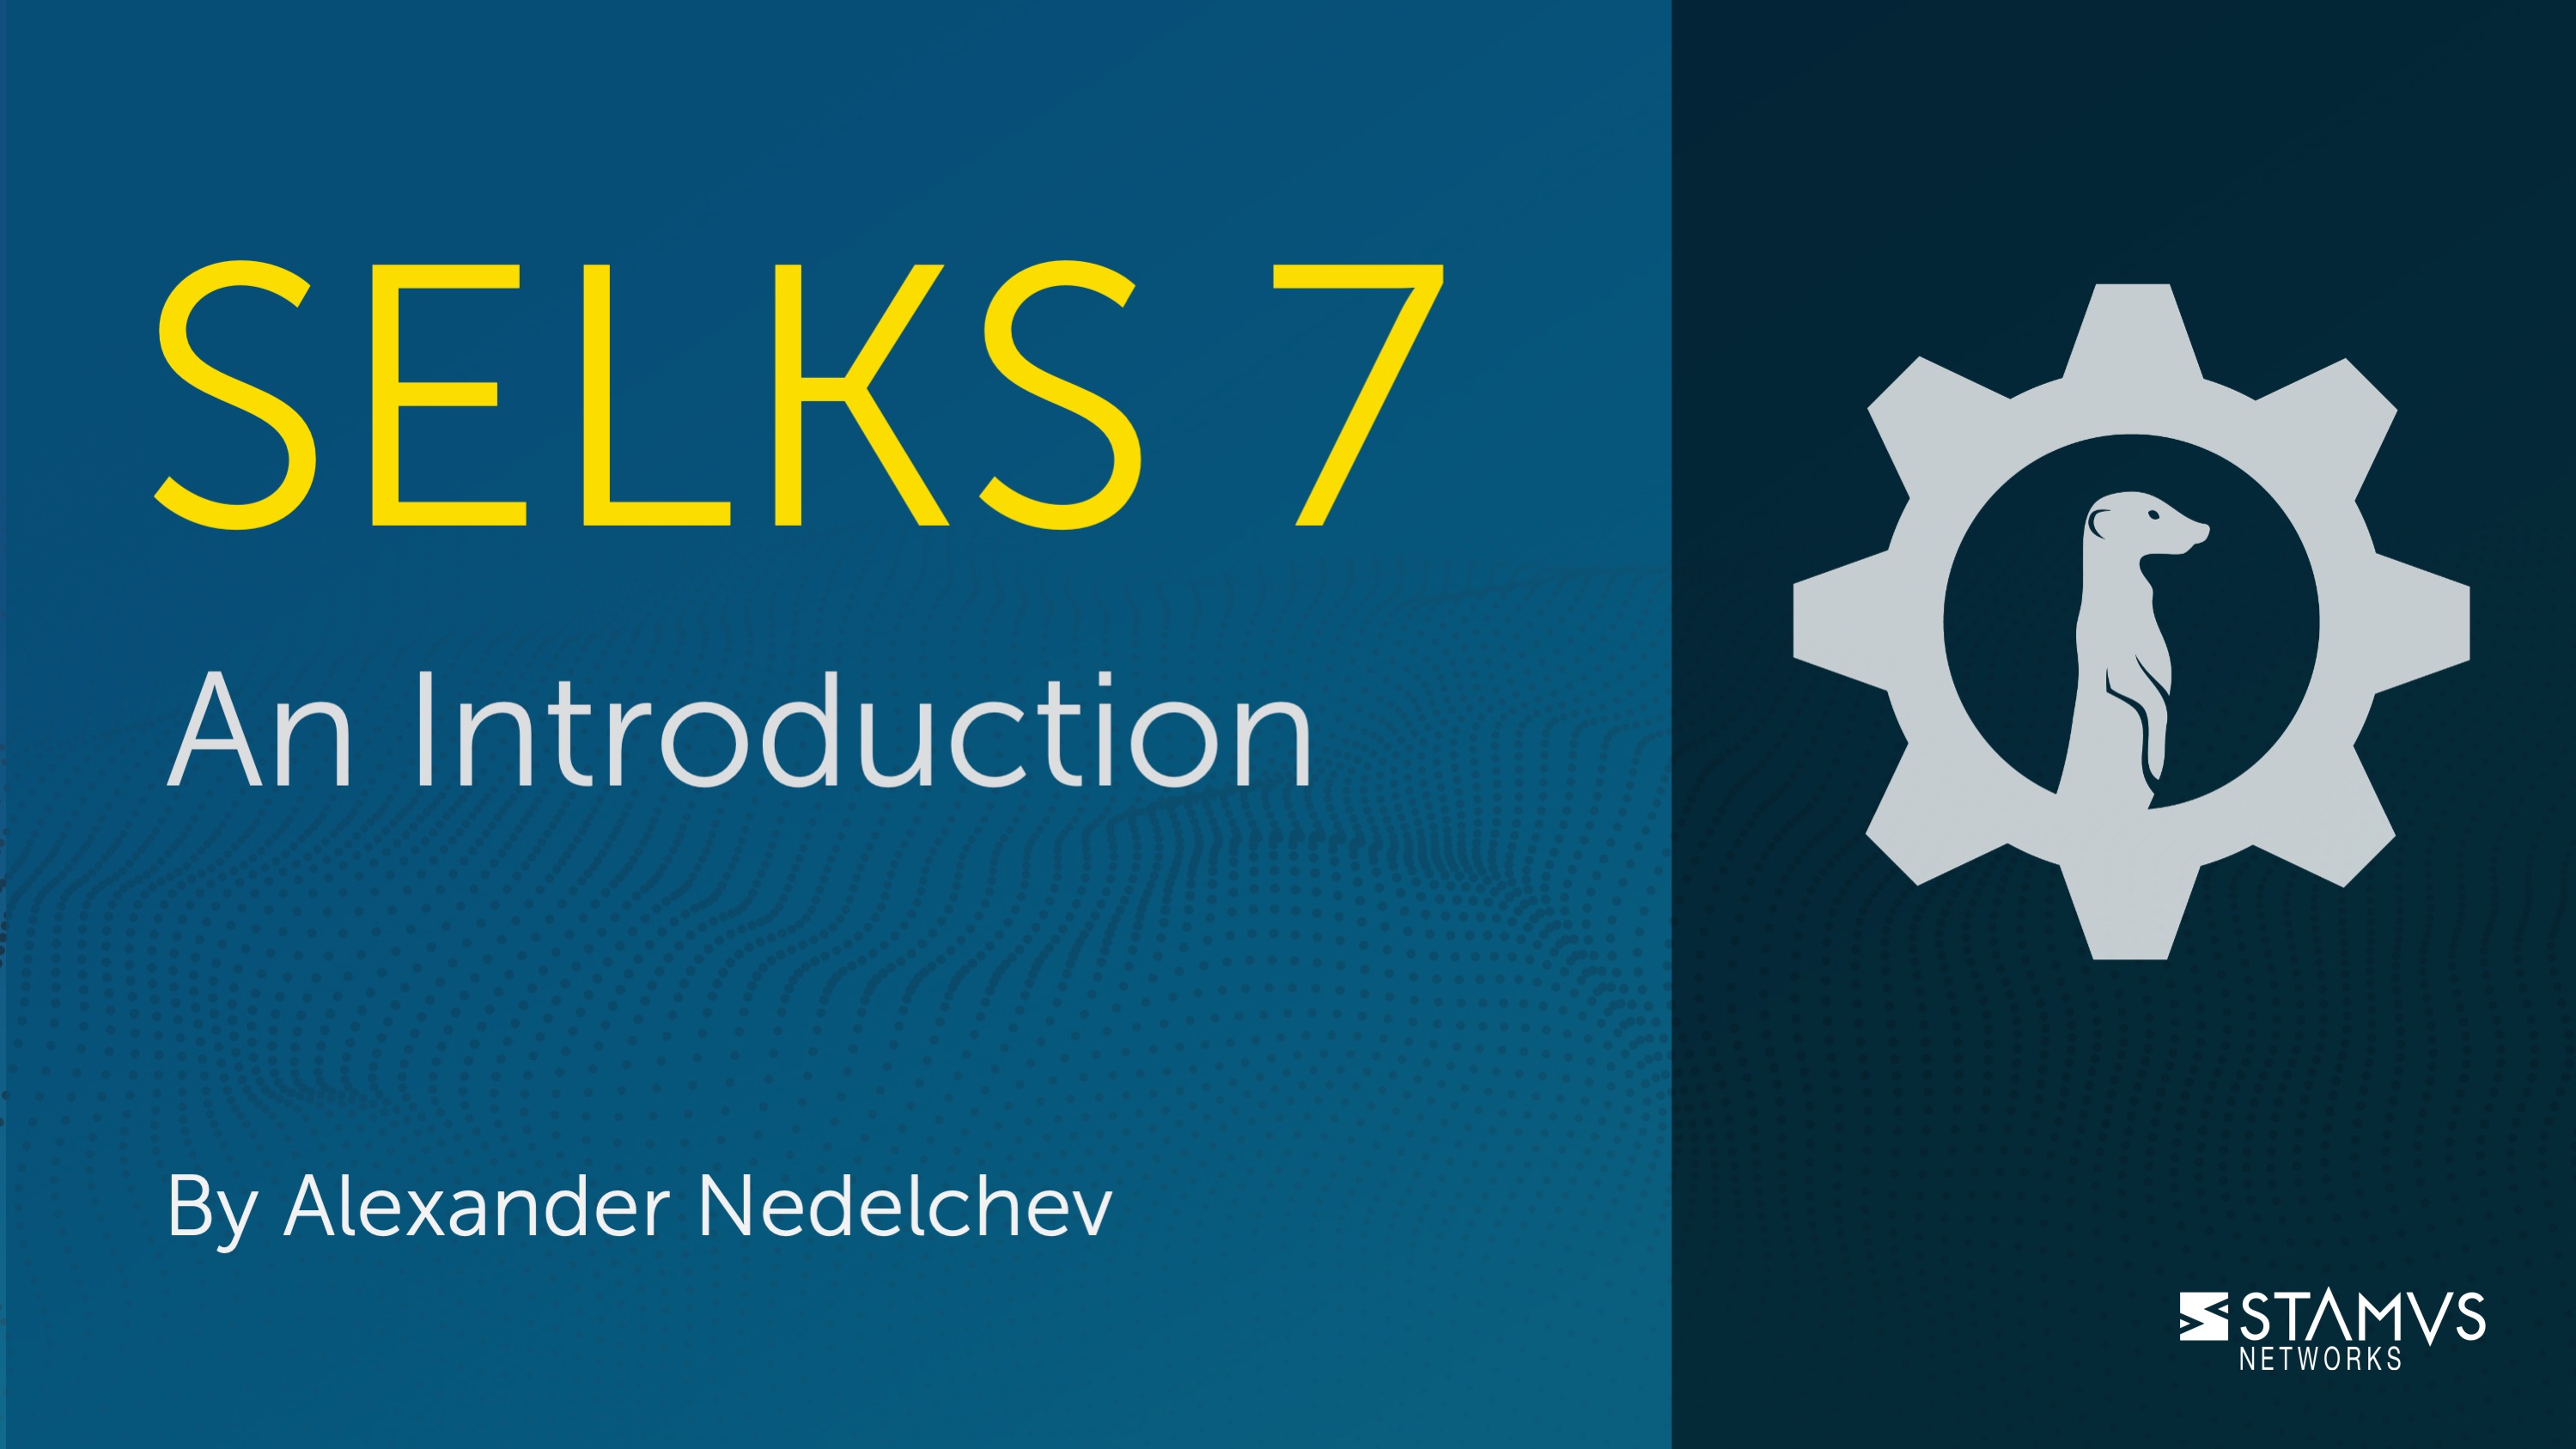 SELKS 7: An Introduction by Alexander Nedelchev